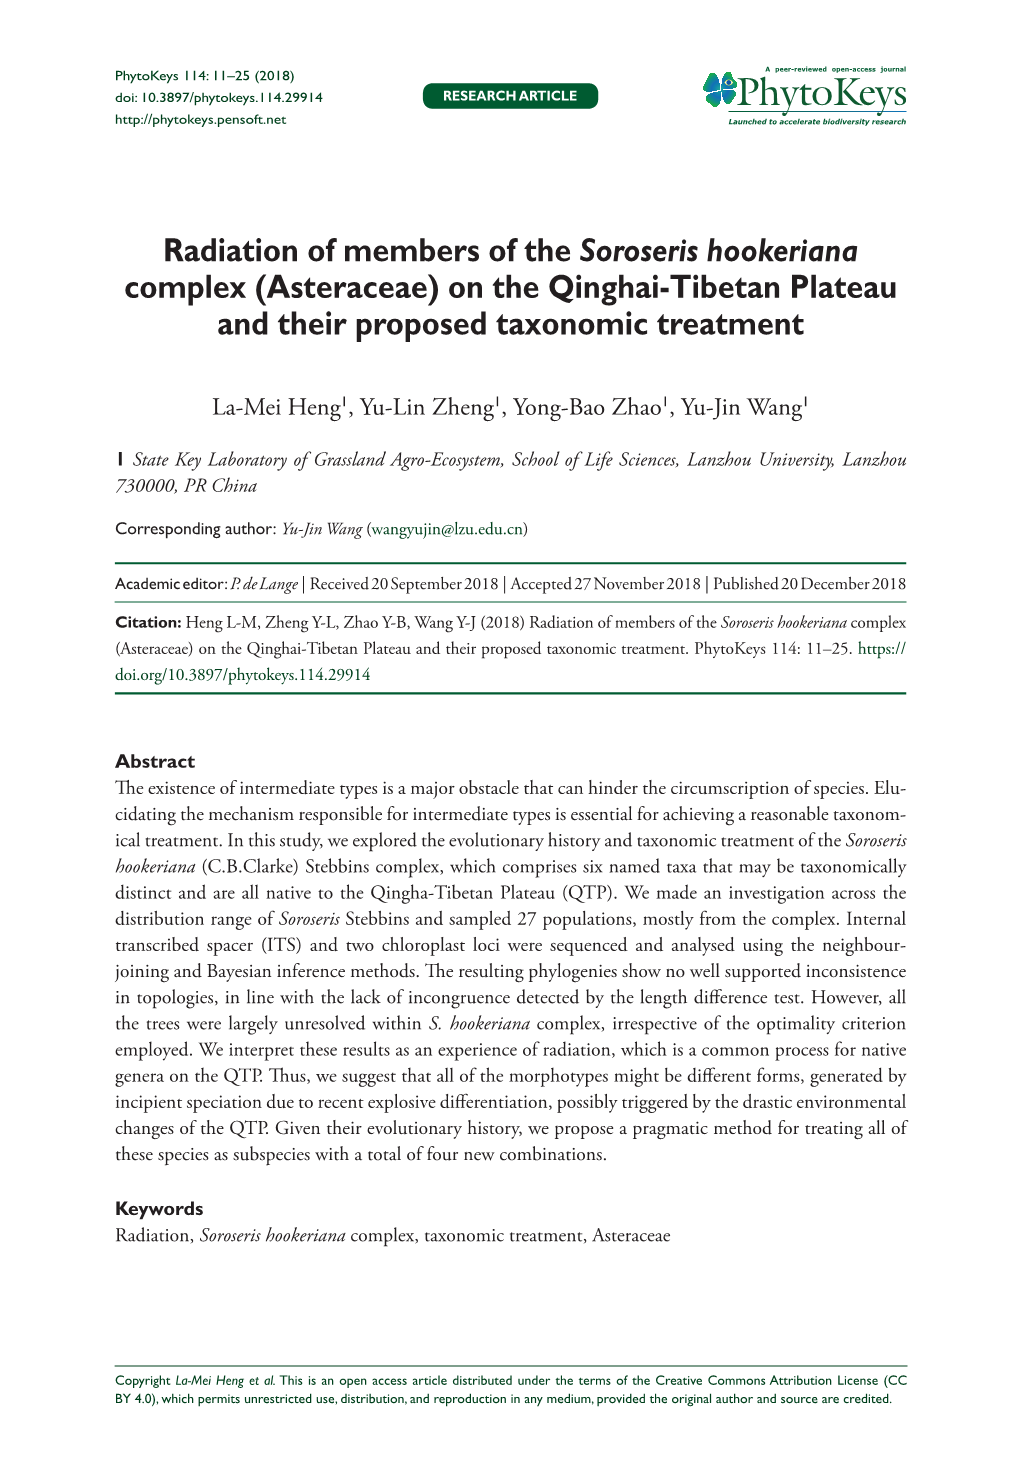 On the Qinghai-Tibetan Plateau and Their Proposed Taxonomic Treatment